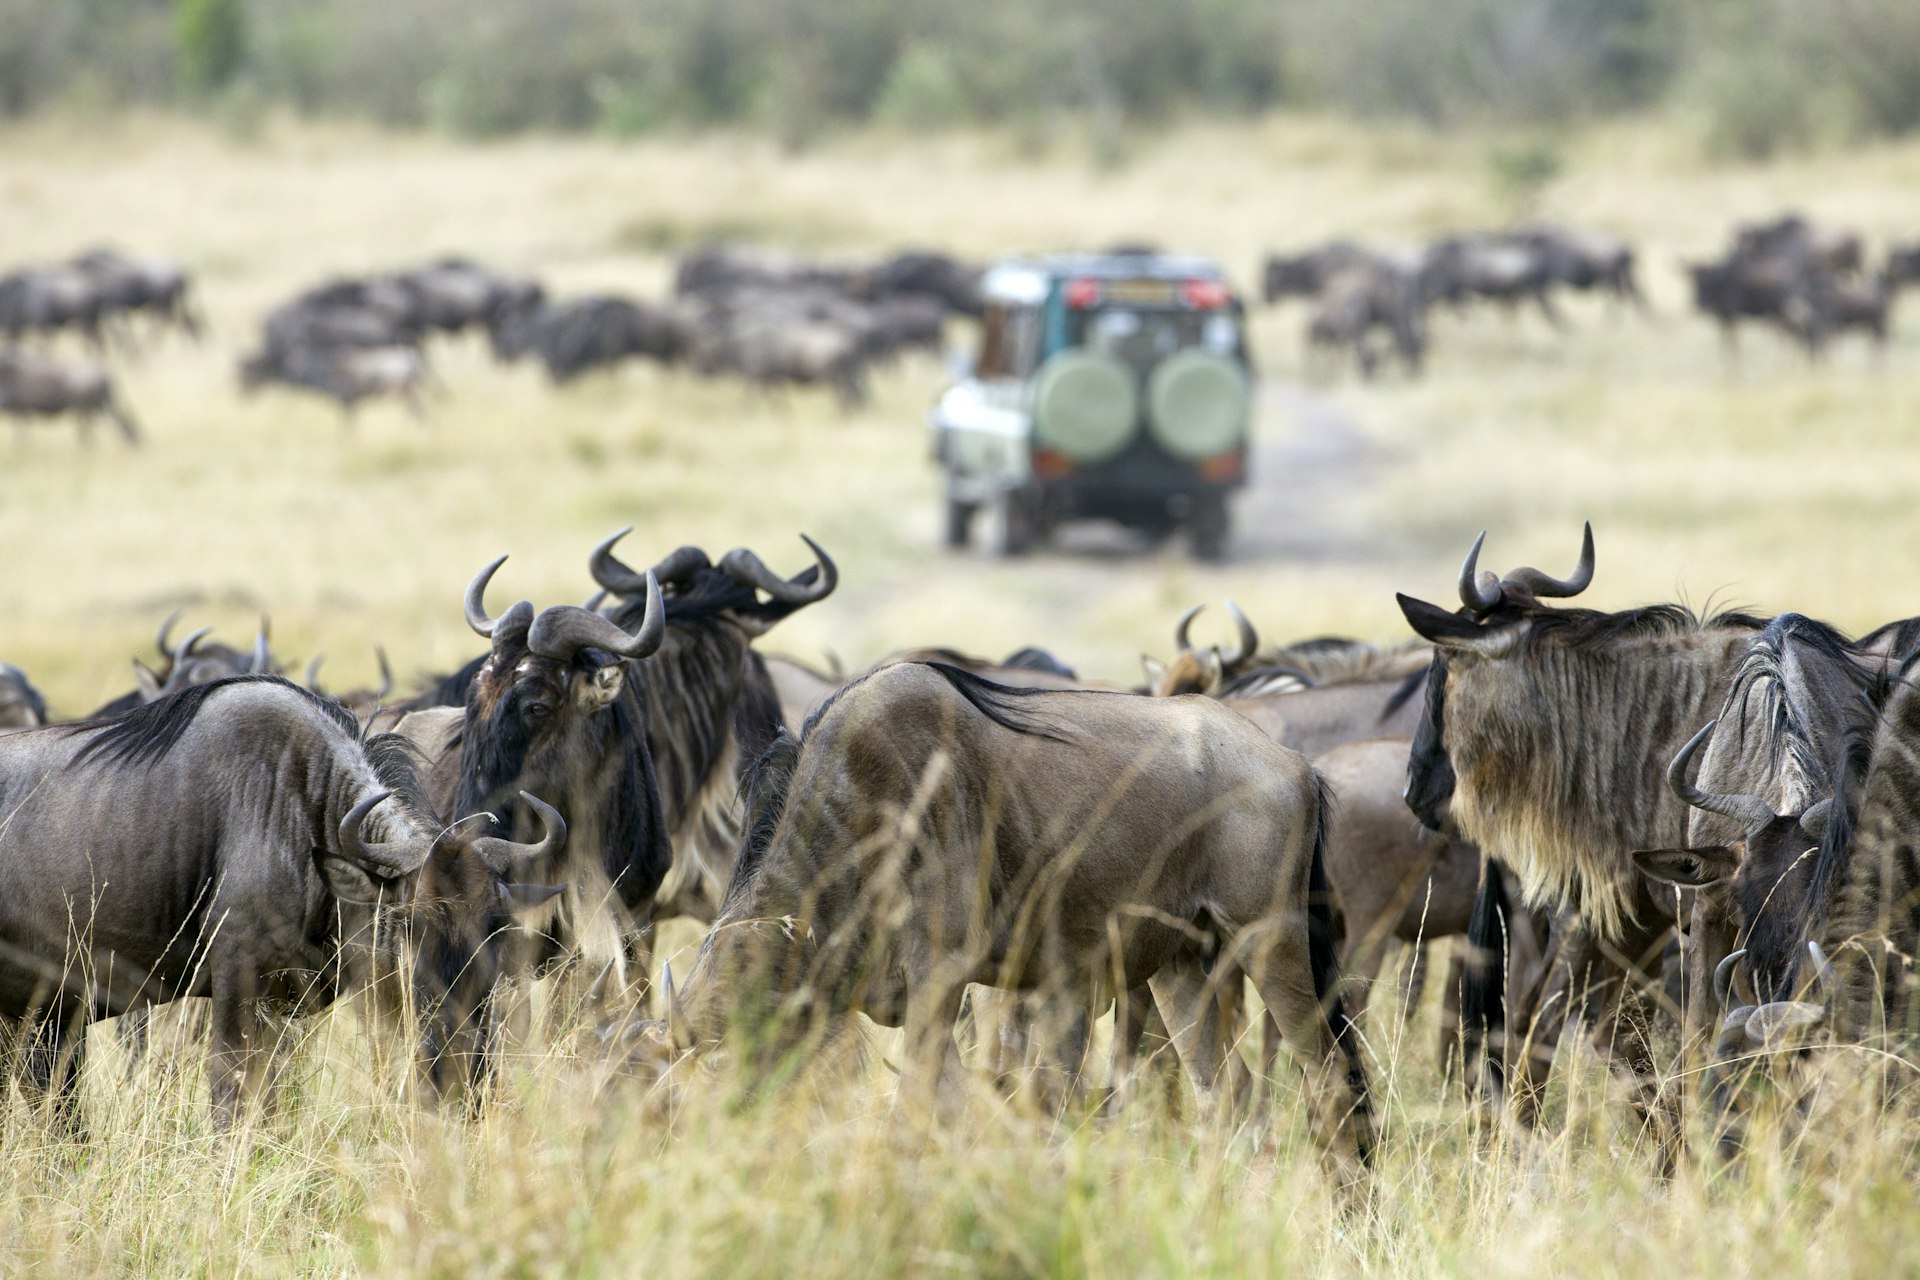 Wildebeests grazing the Savannah during the annual migration in Kenya